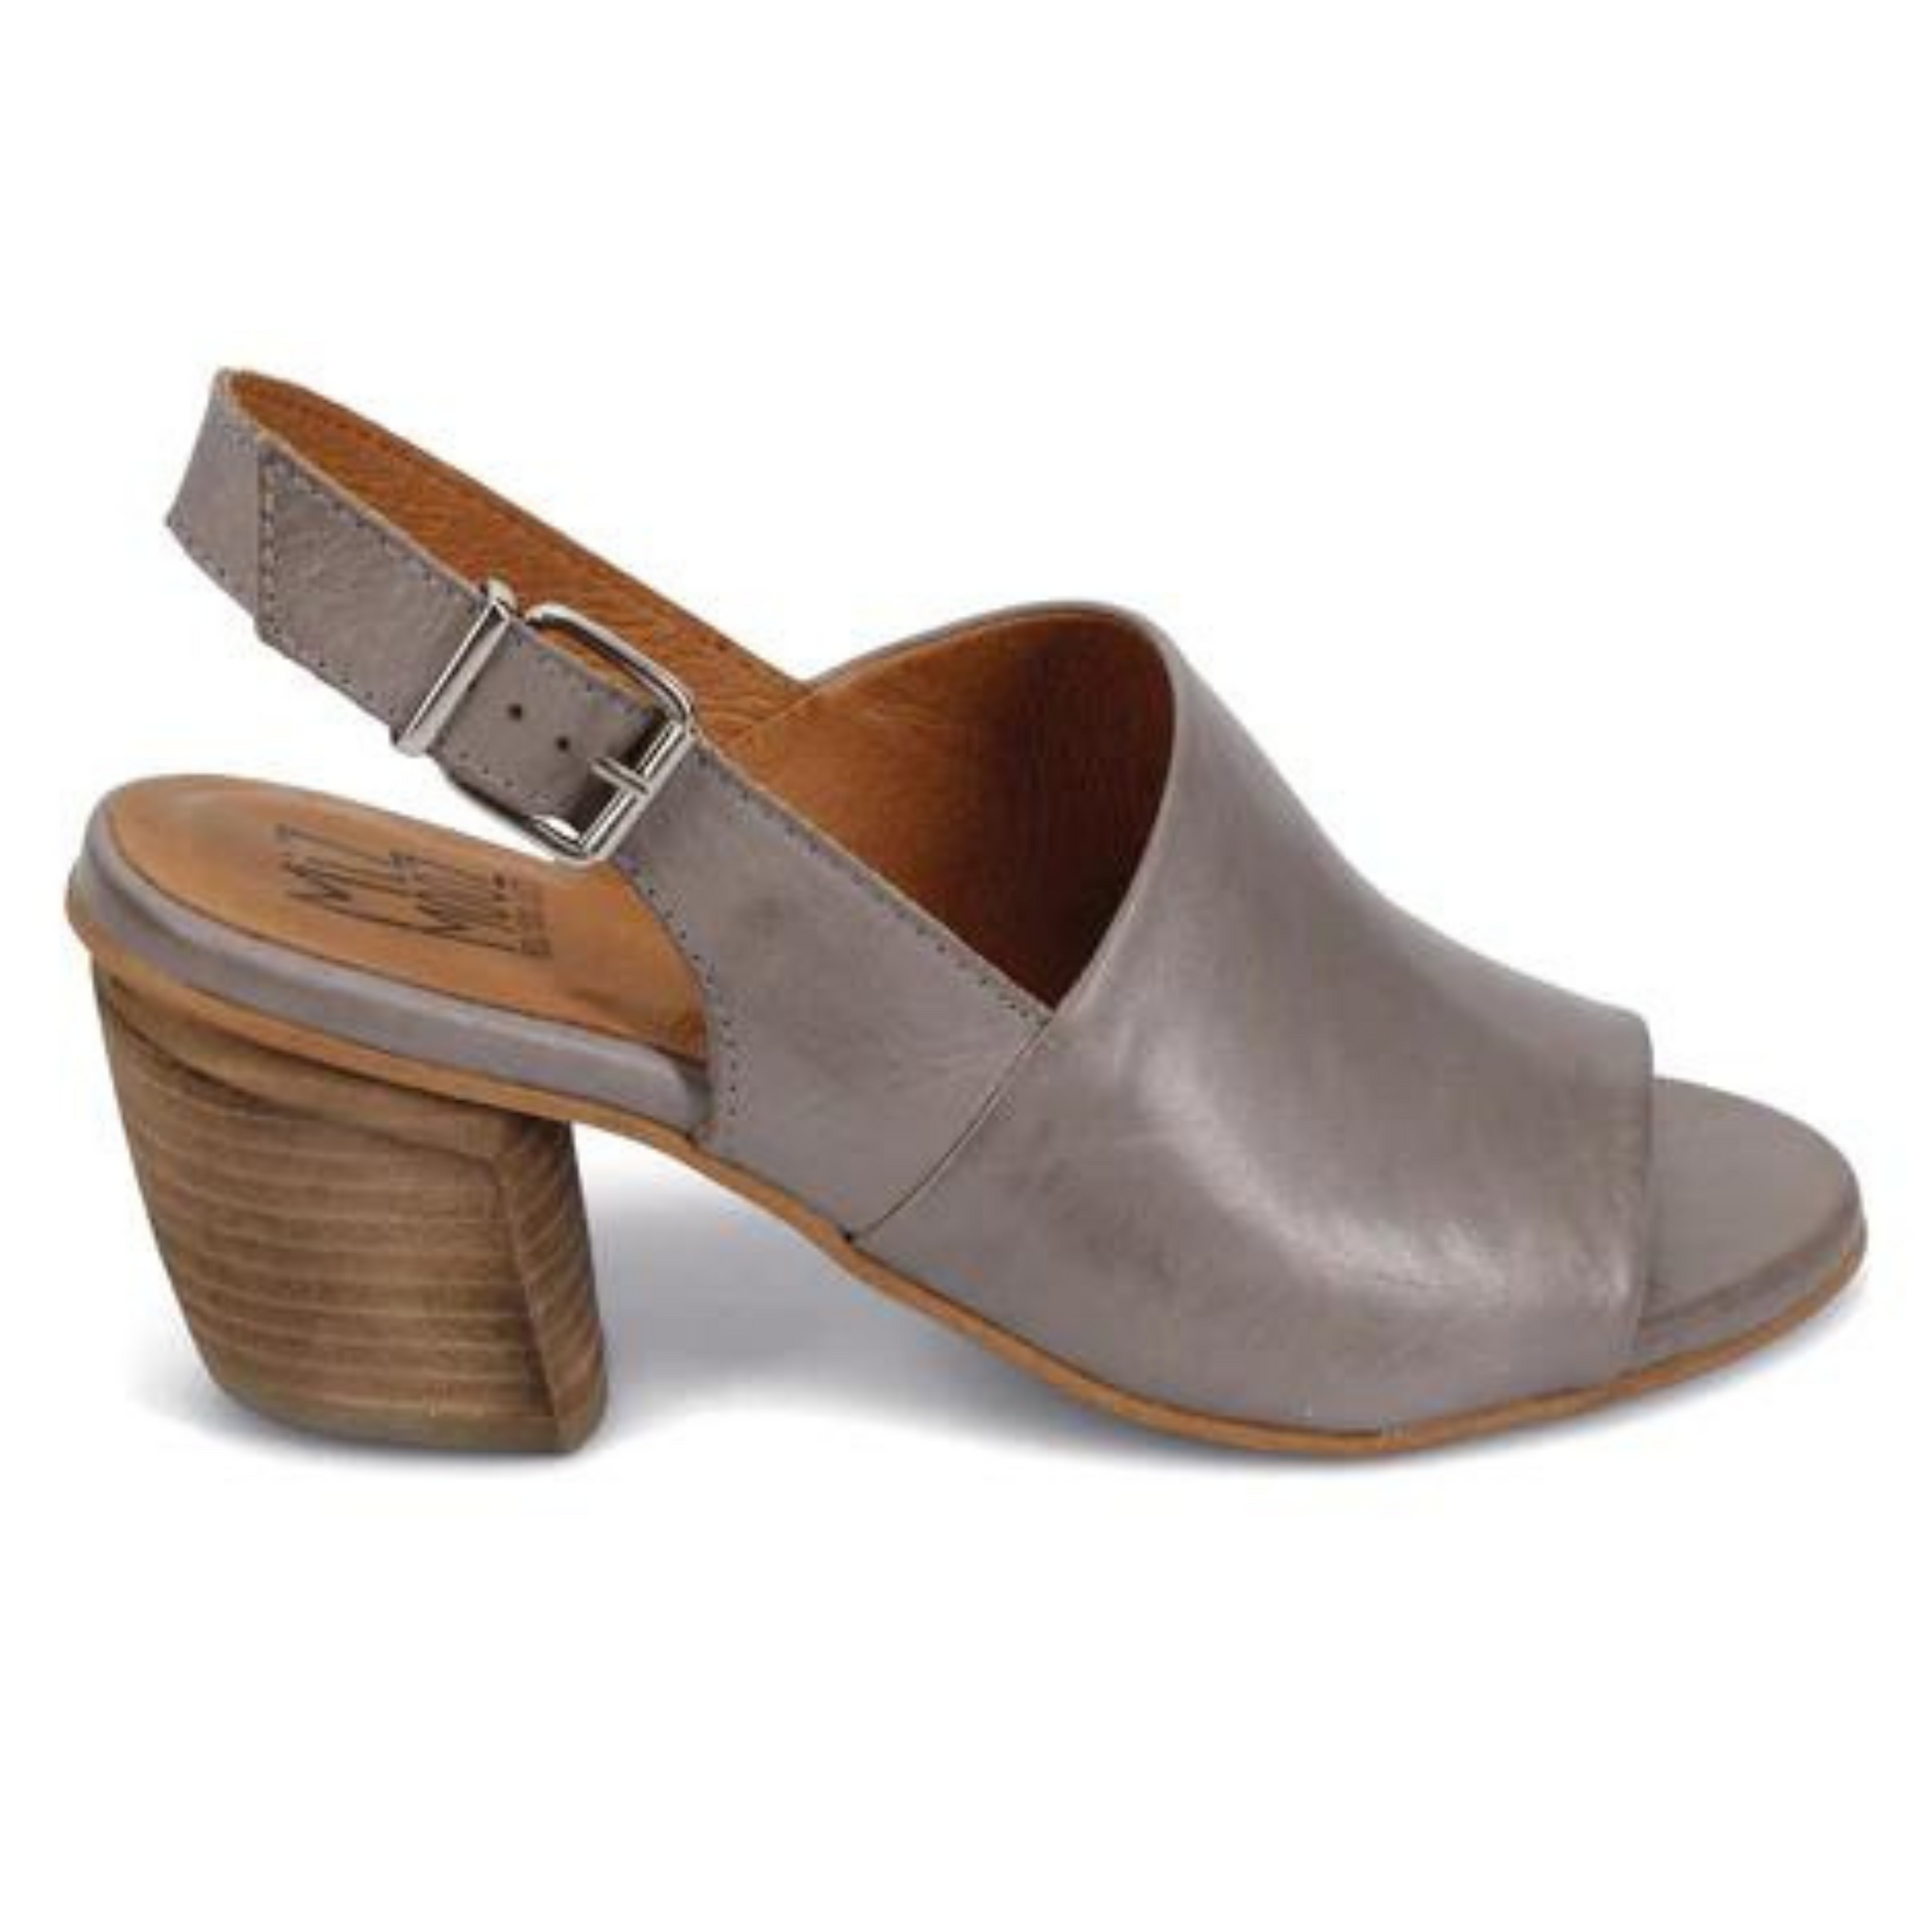 A side view of the heeled sandal in the colour grey. Ths photo shows the height of the heel and how the strap has an adustable buckle.